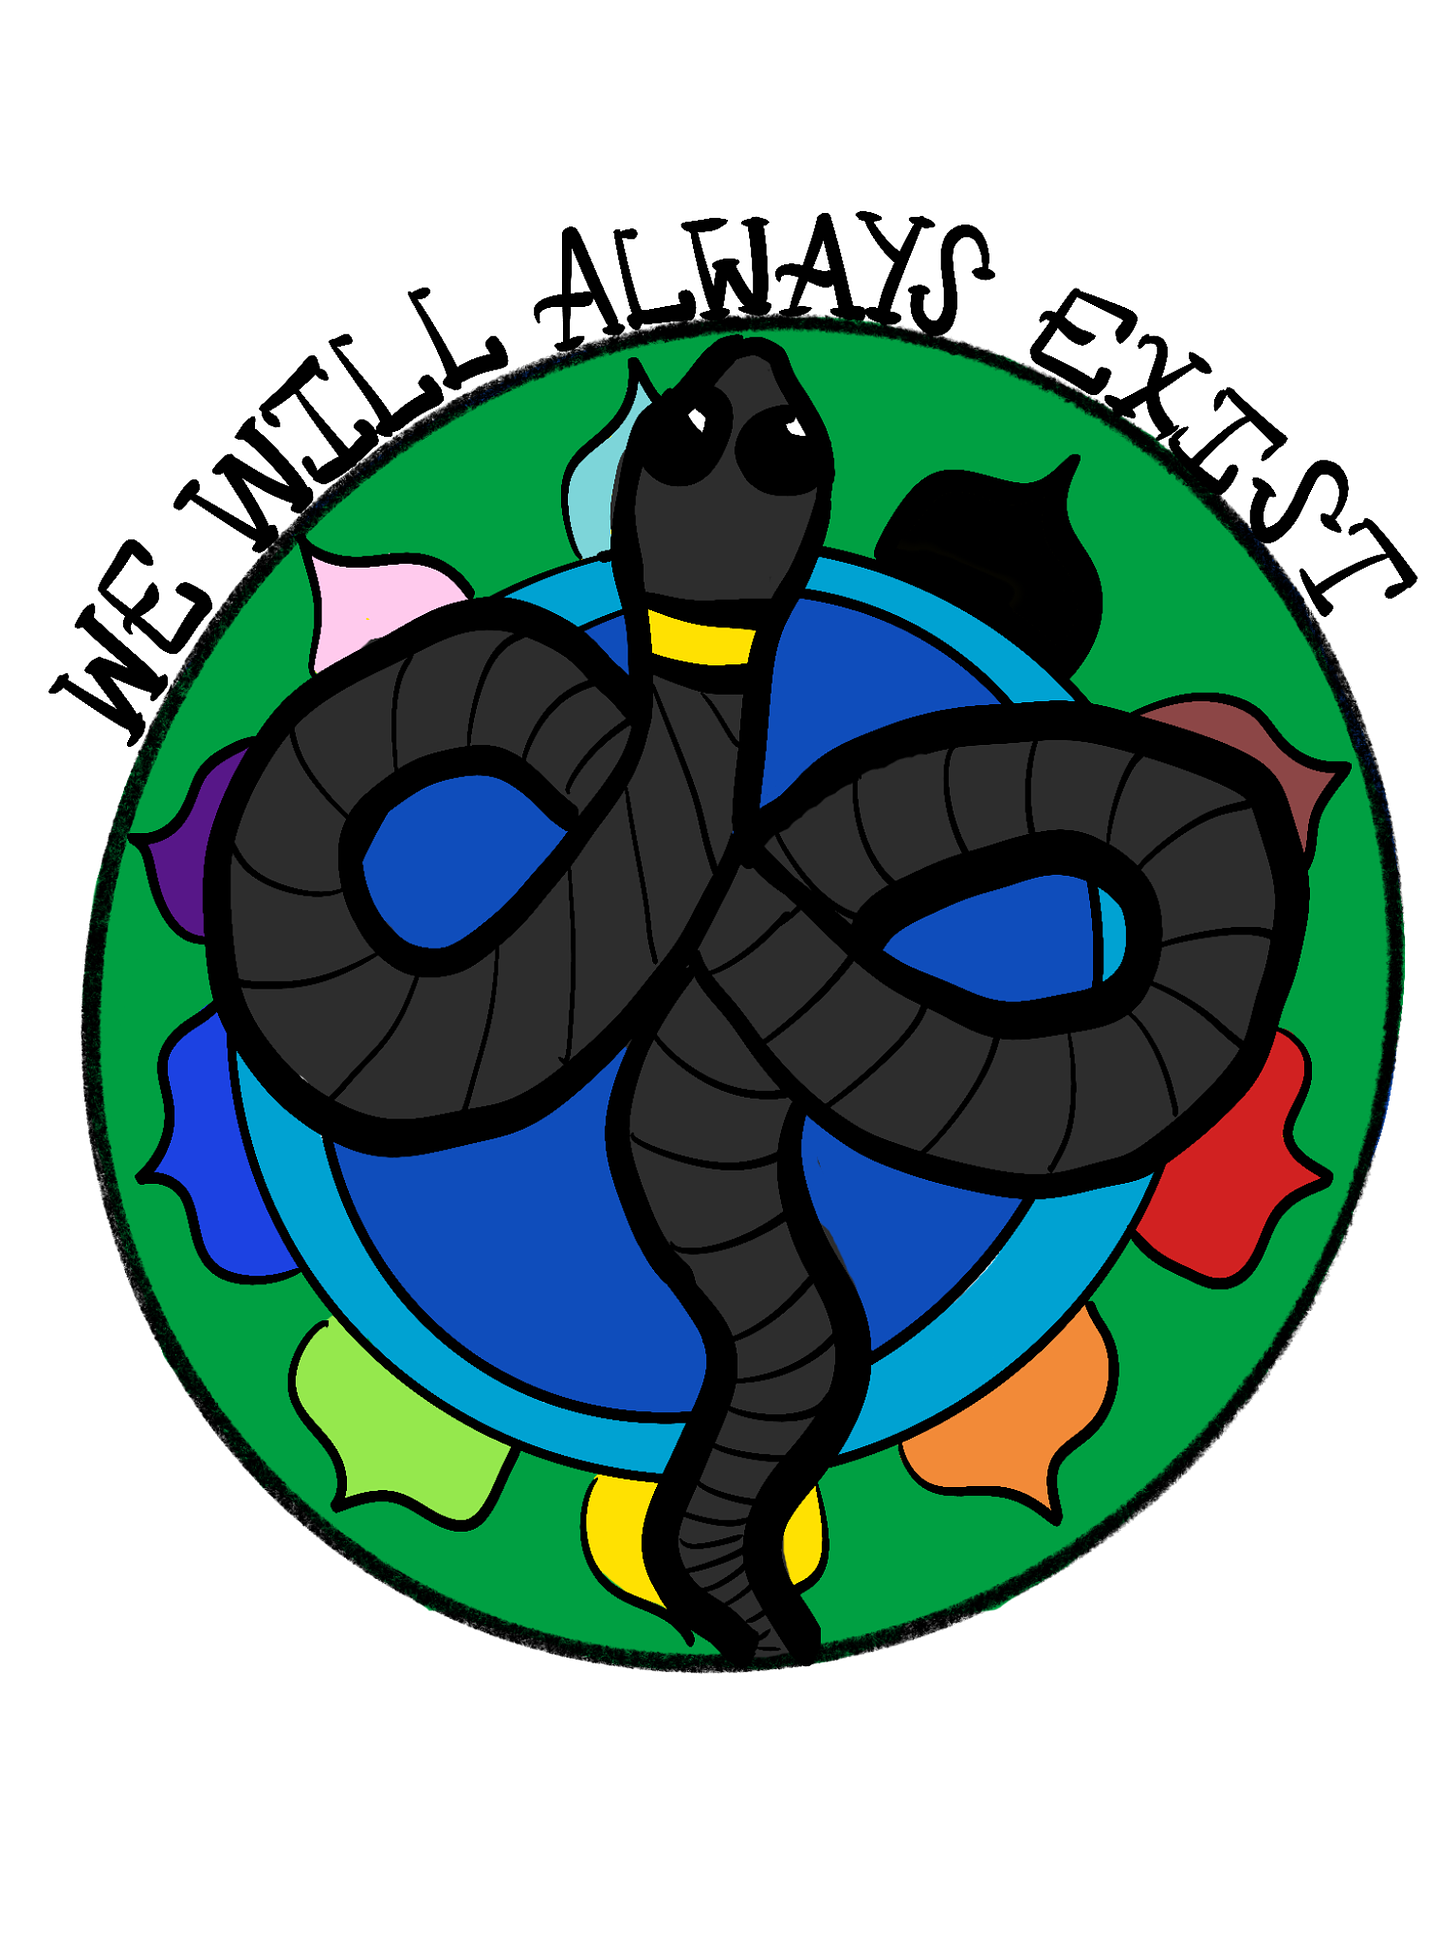 Digital drawing of a black snake with the words "we will always exist" on top.